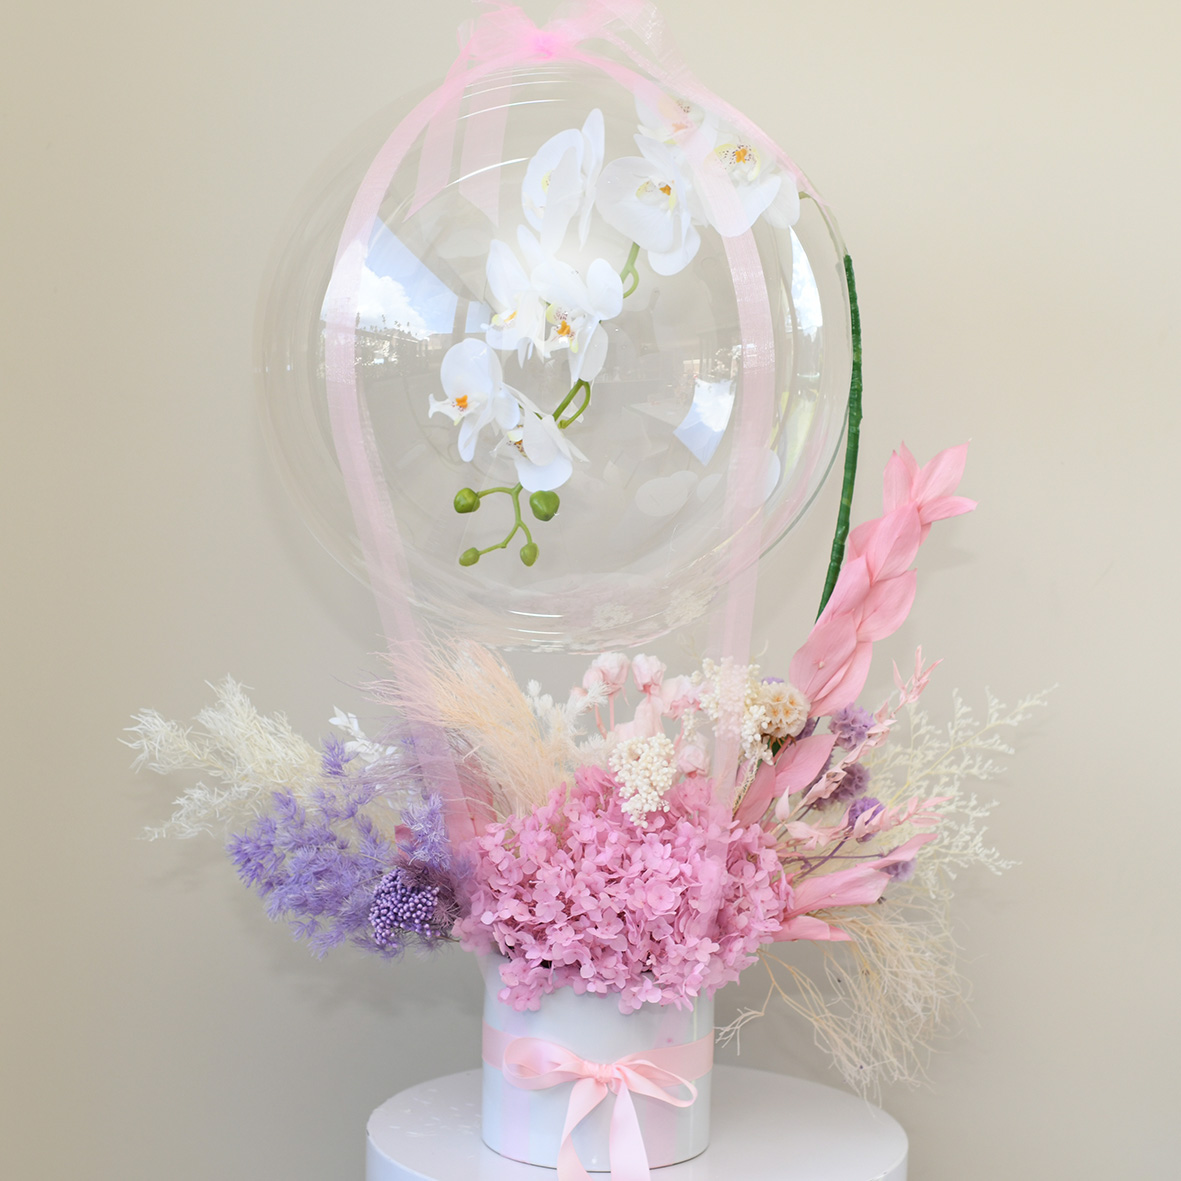 Dried Flowers & Balloon Bouquet Sydney Delivery